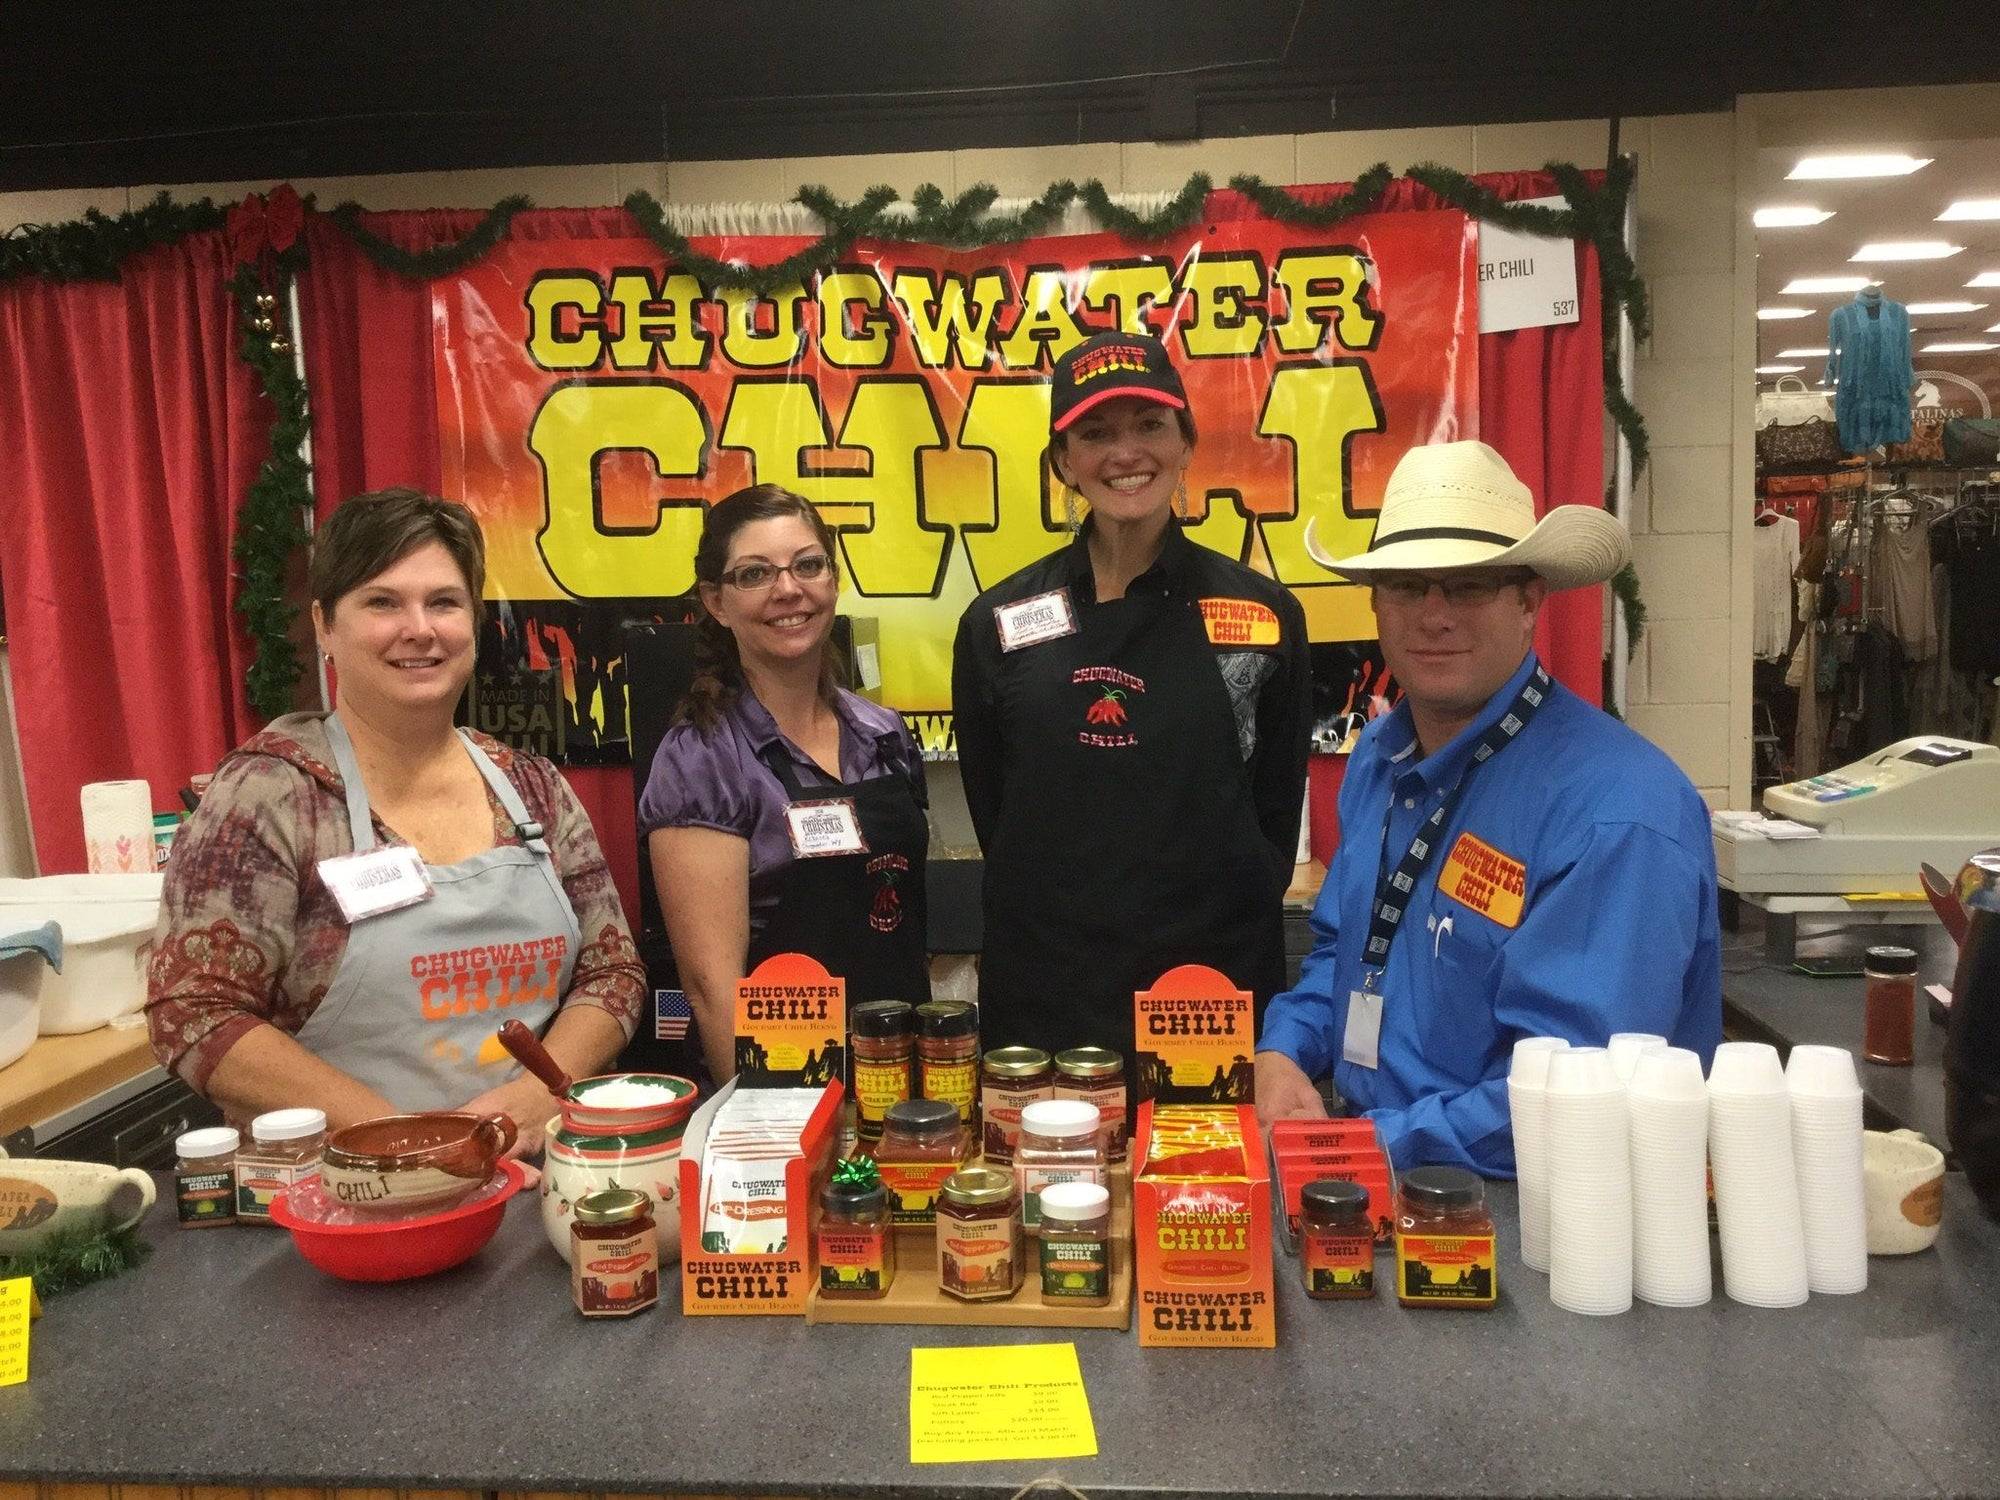 Look for Chugwater Chili this fall at the following shows.